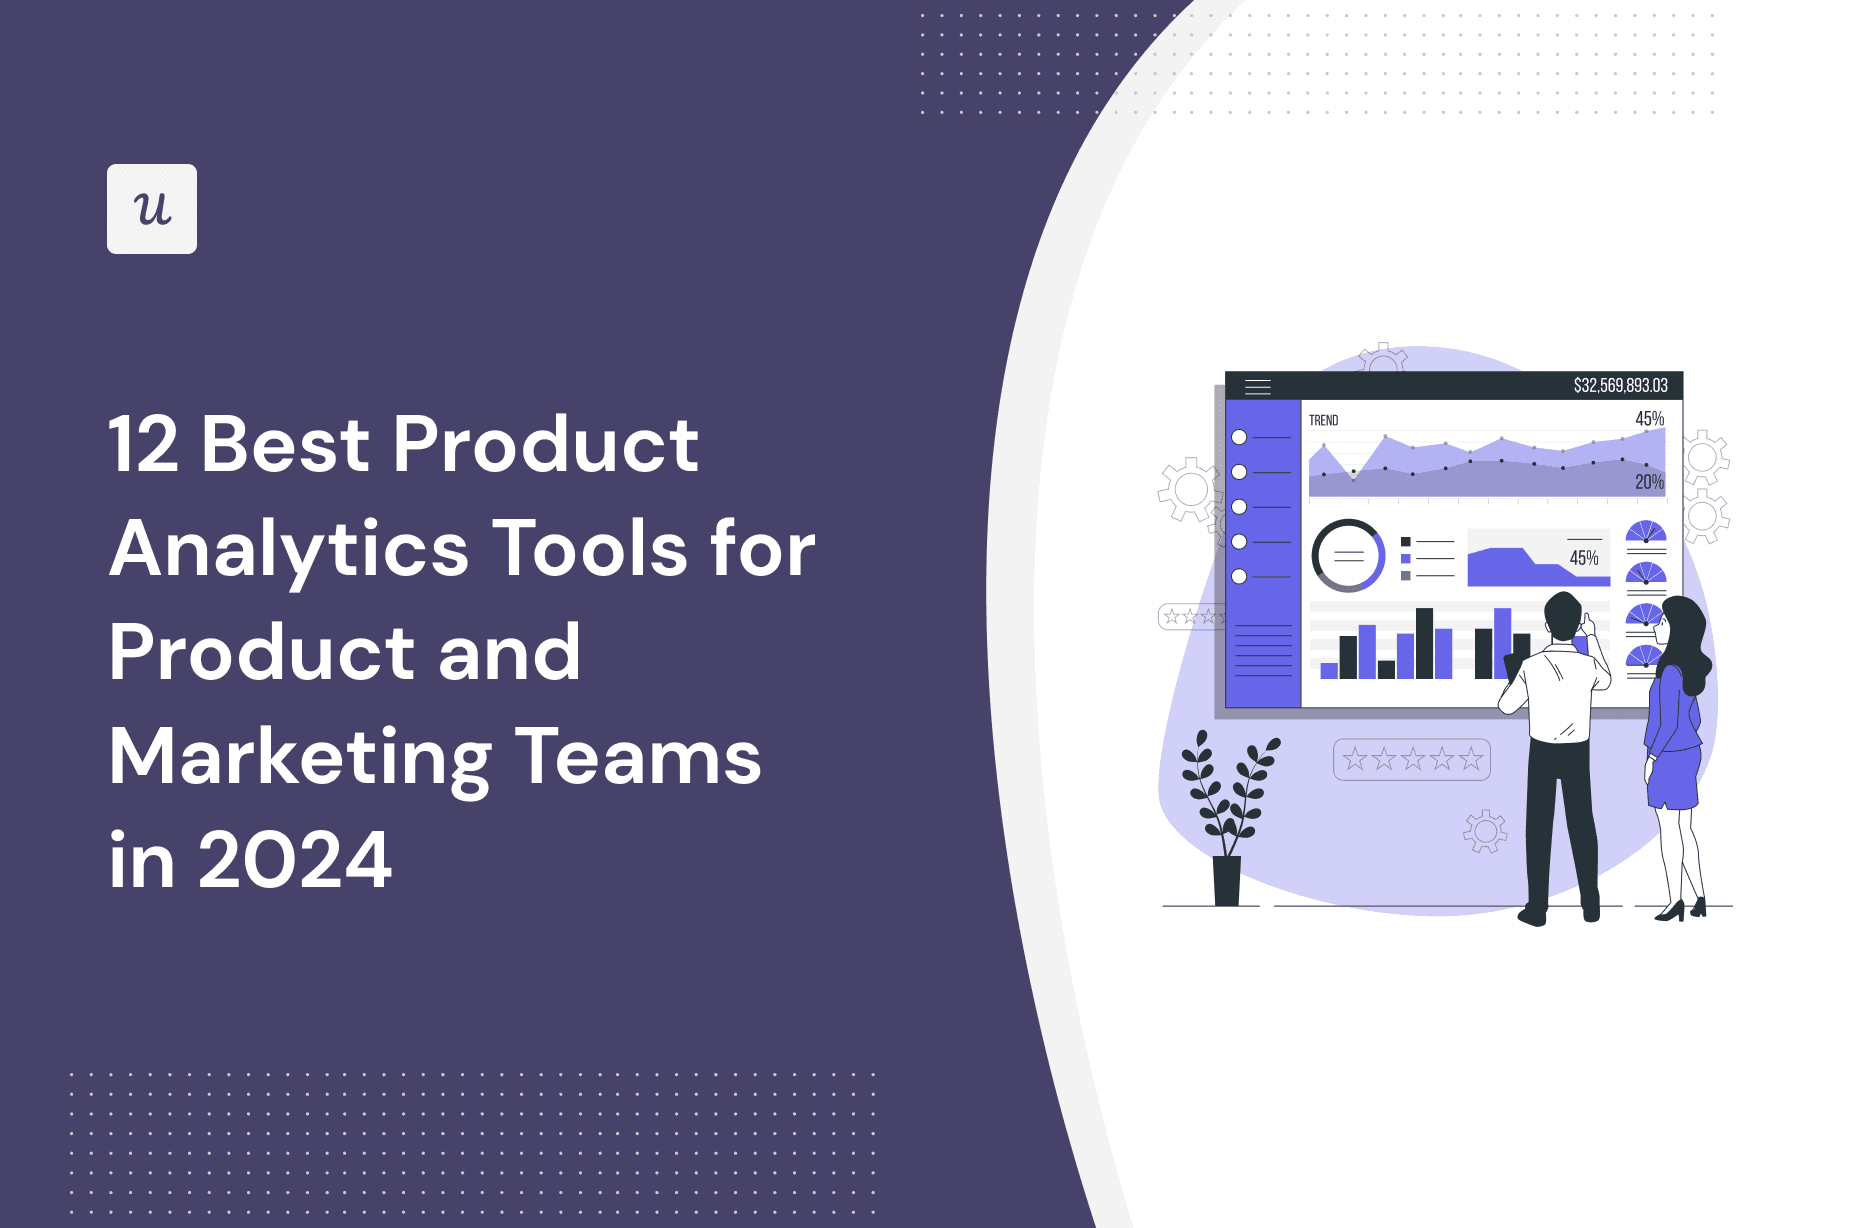 12 Best Product Analytics Tools for Product and Marketing Teams in 2024 cover